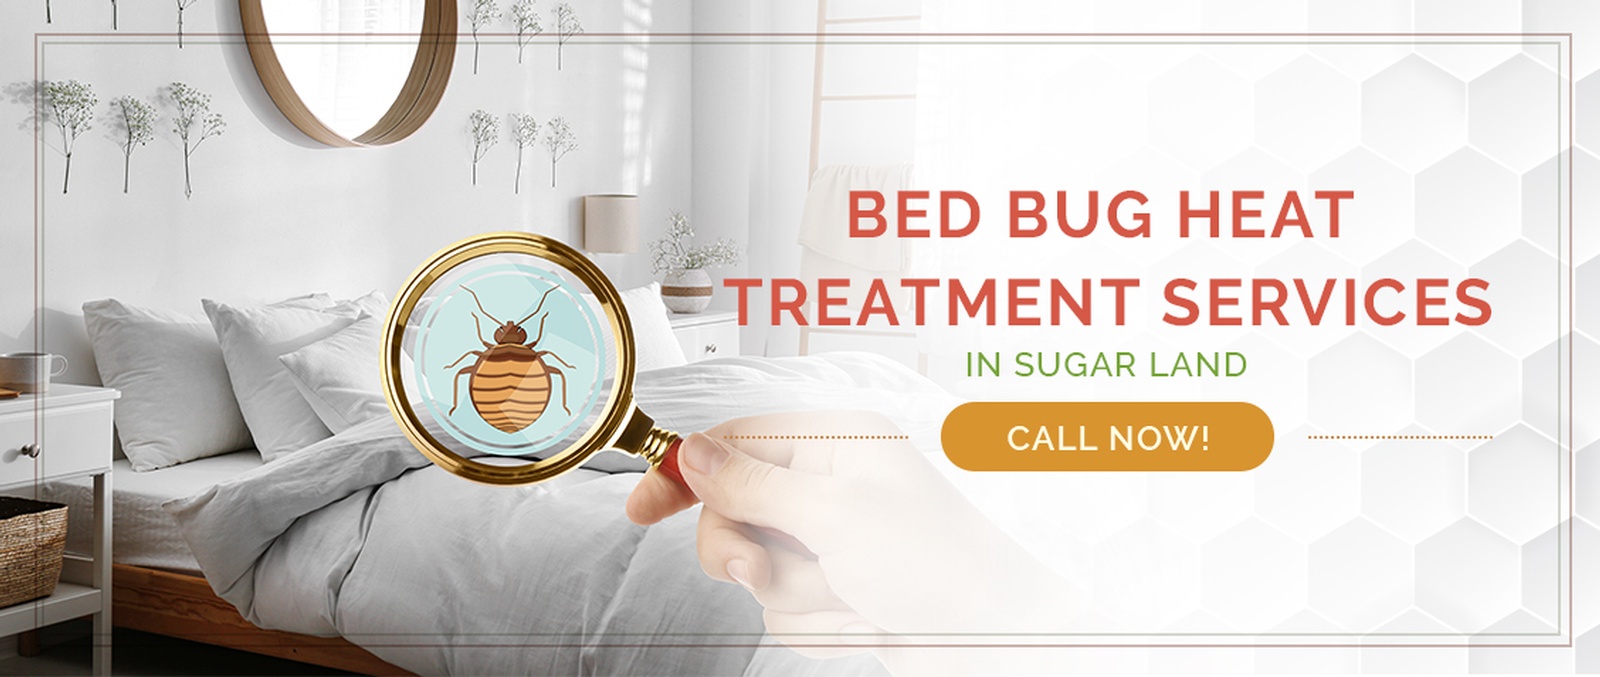 Sugar Land Bed Bug Treatment / Heater Rental Services by Houston Bed Bug Heaters